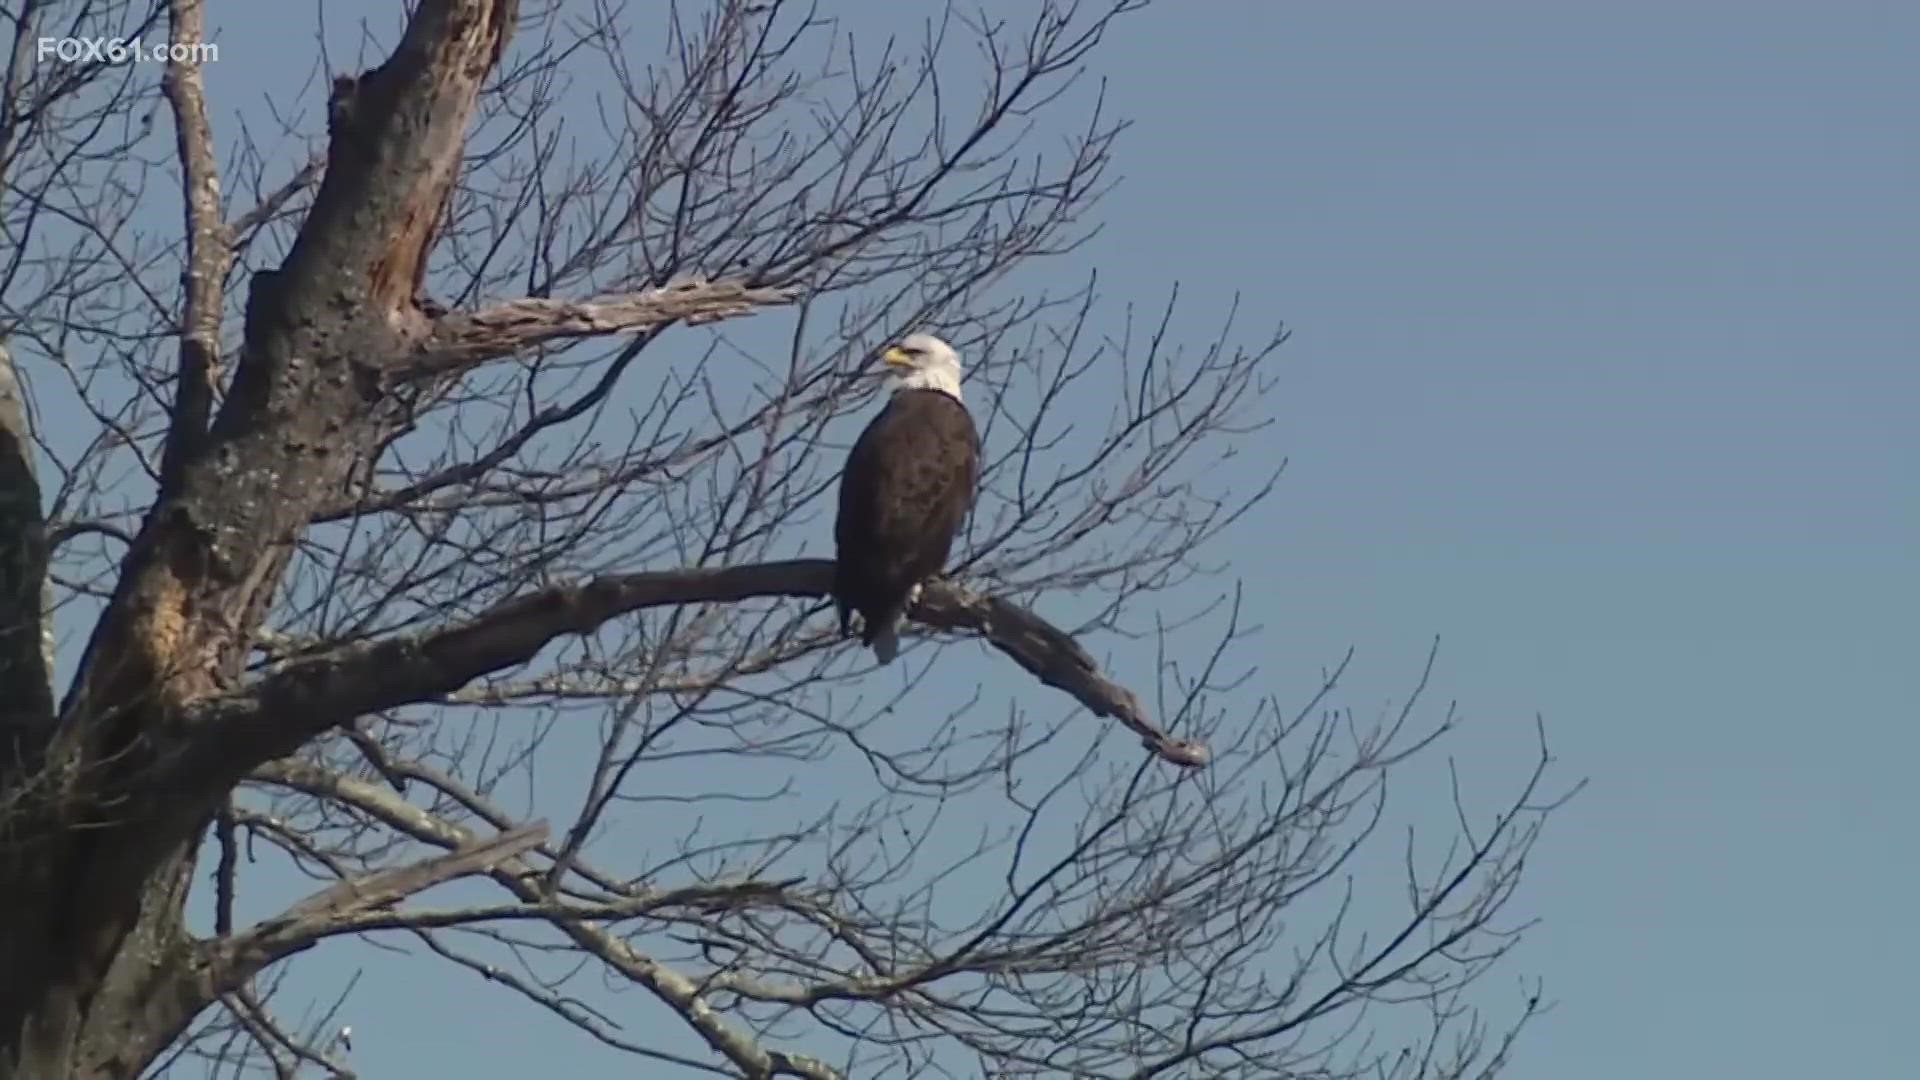 Major comebacks are happening on the Connecticut River. The RiverQuest Eagle and Winter Wildlife Cruise is in its 21st year